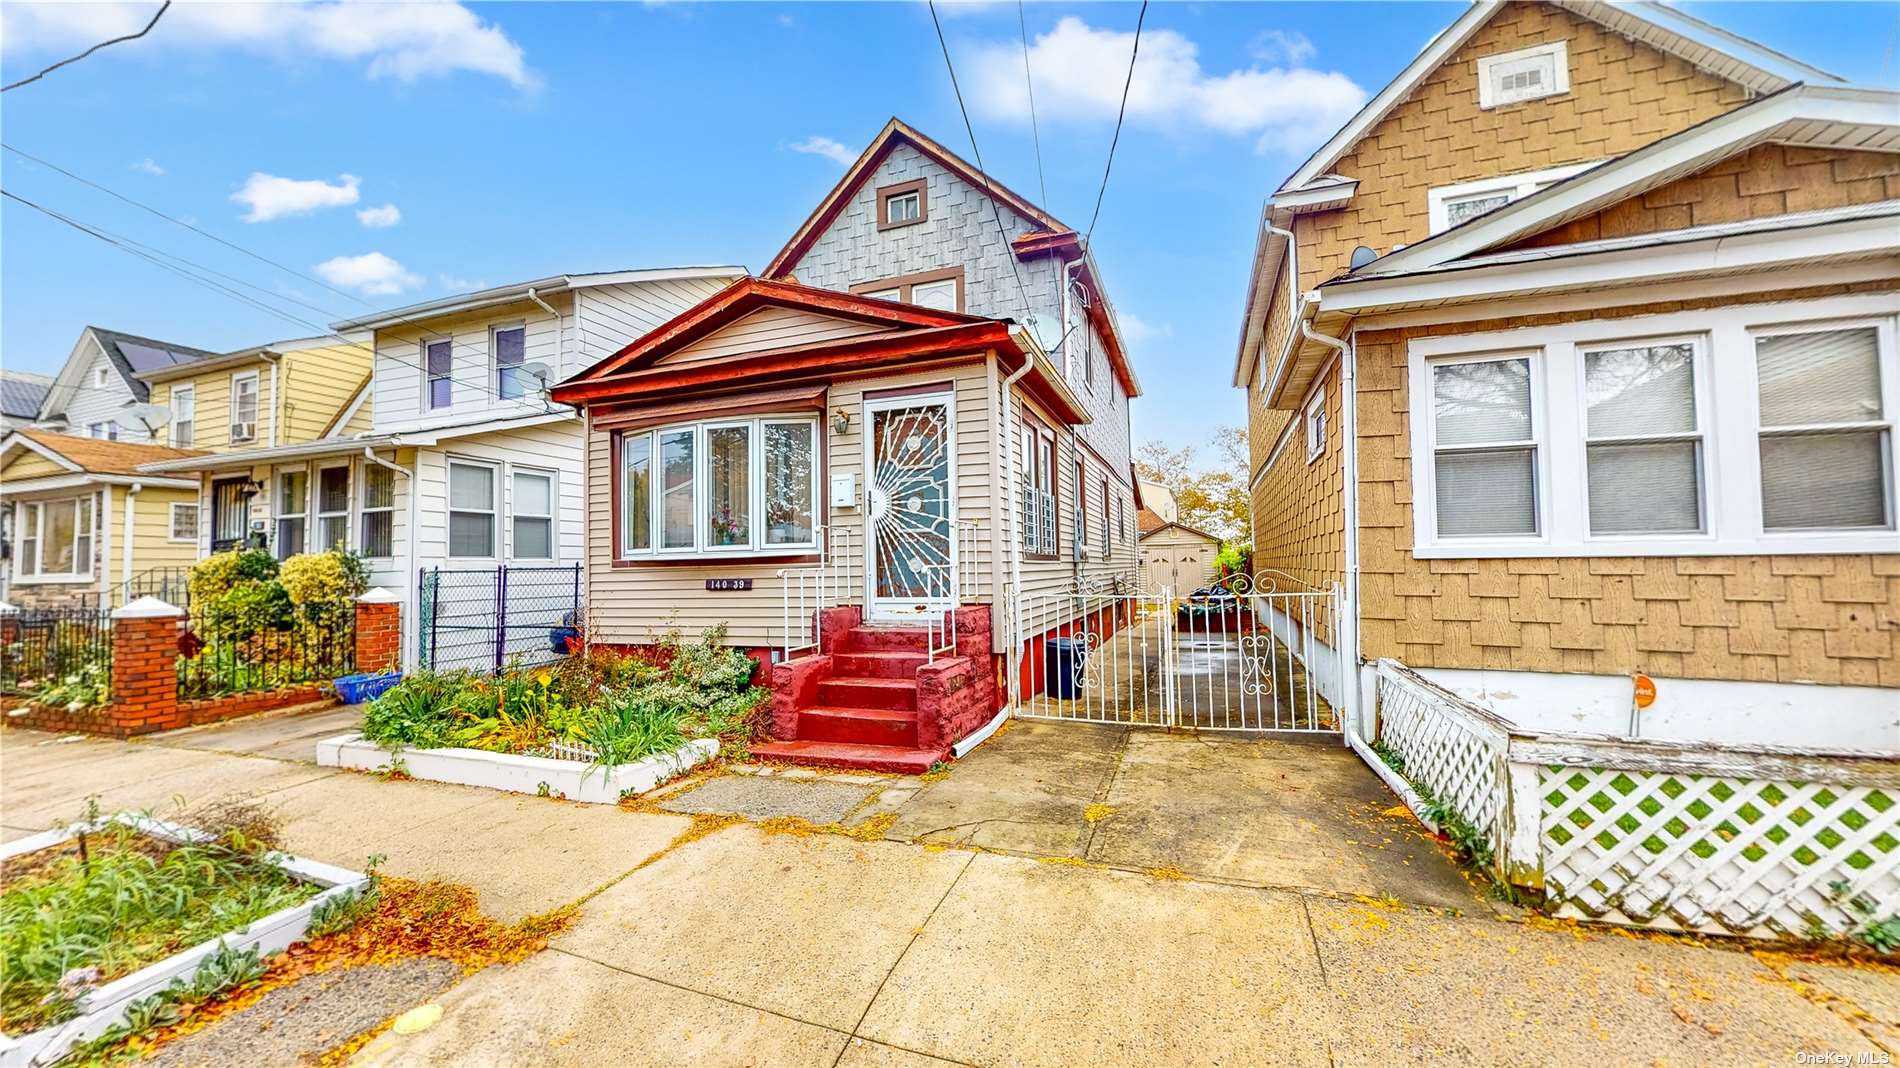 Single Family in Jamaica - 173rd  Queens, NY 11434